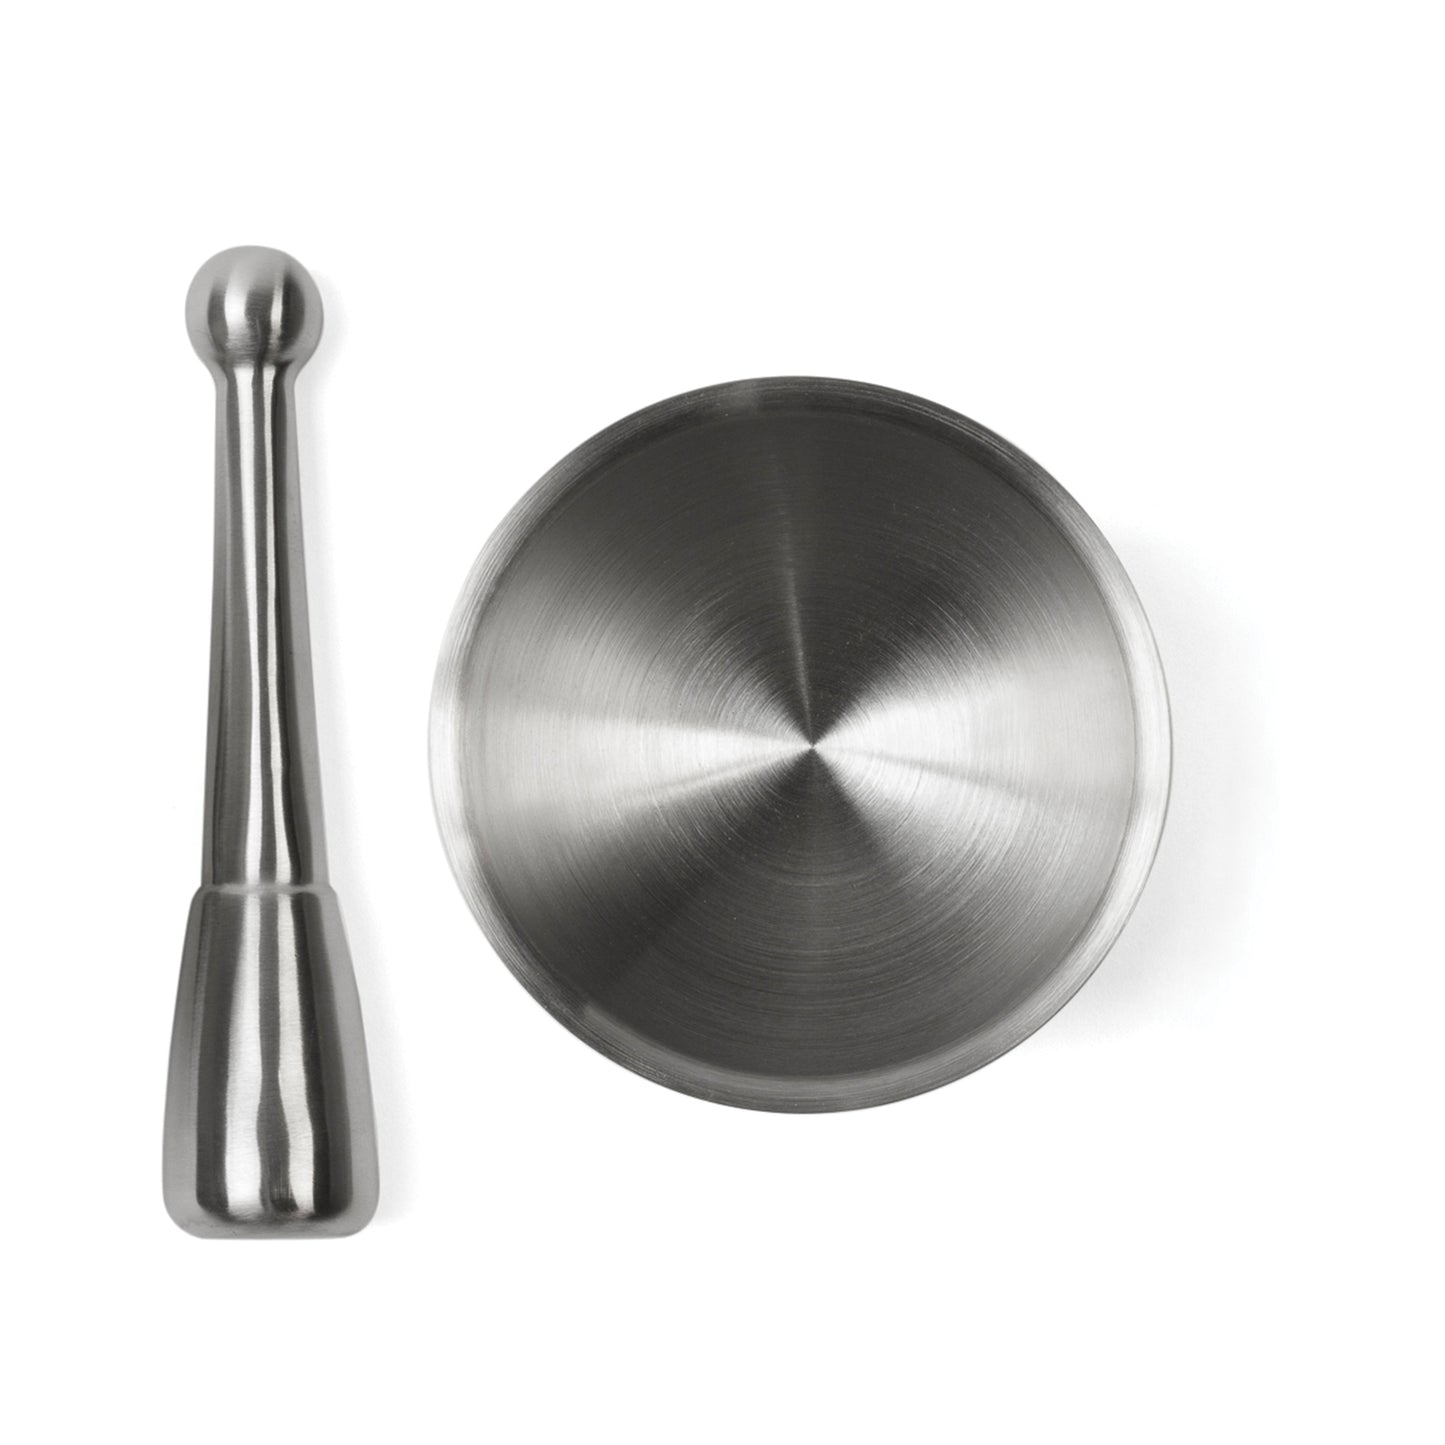 Stainless Steel Mortar & Pestle - 4.7"x3.3"